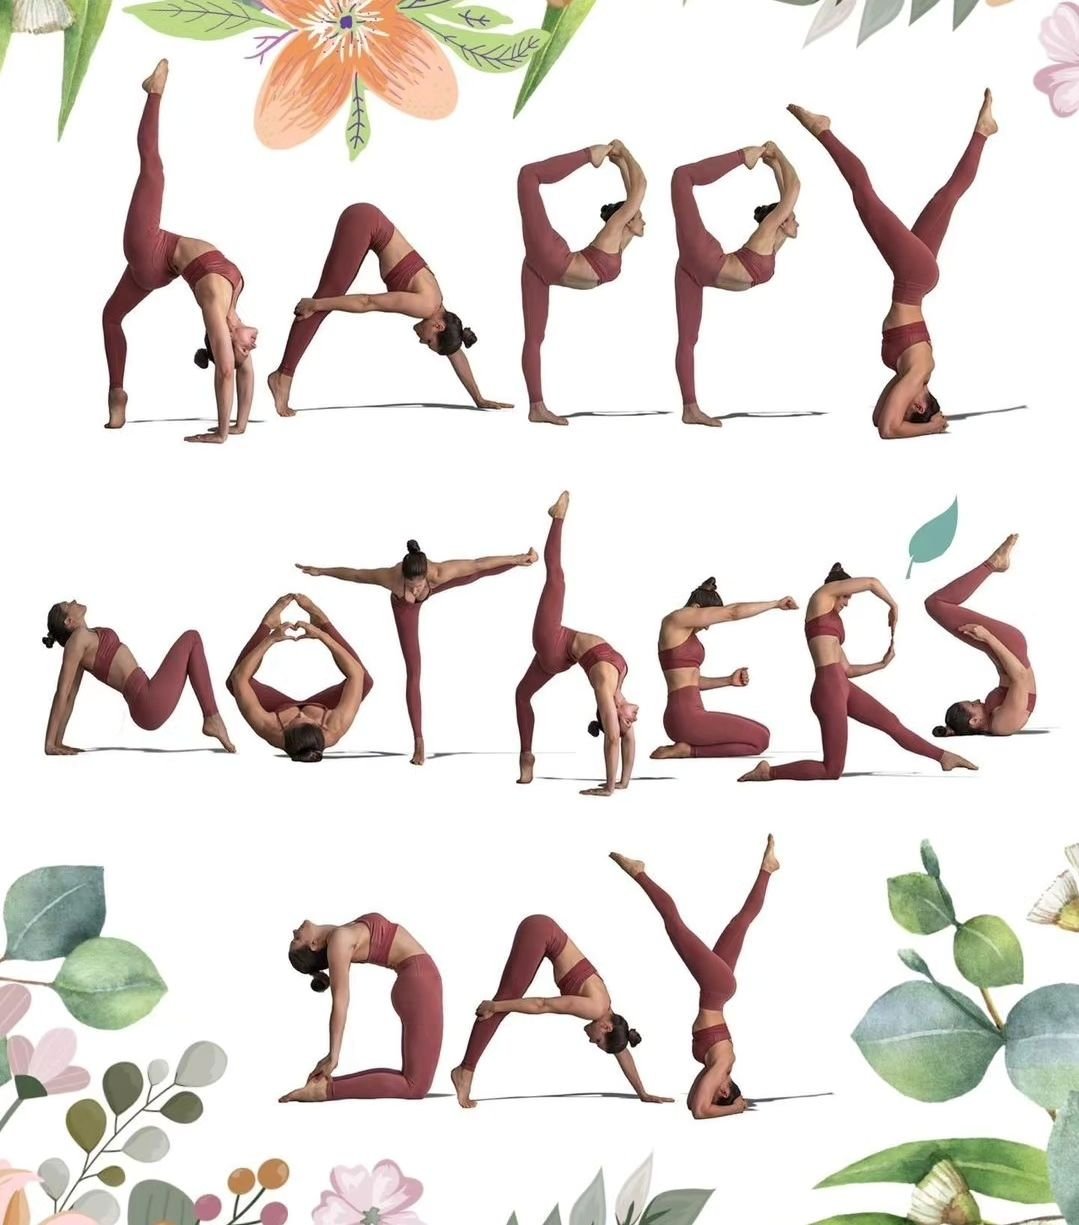 Happy Mothers Day!!!

As we celebrate Mother's Day, Standing Bear Network extends our warmest greetings and heartfelt appreciation to all the wonderful mothers out there. This special day dedicated to honoring mothers holds deep significance as it pr